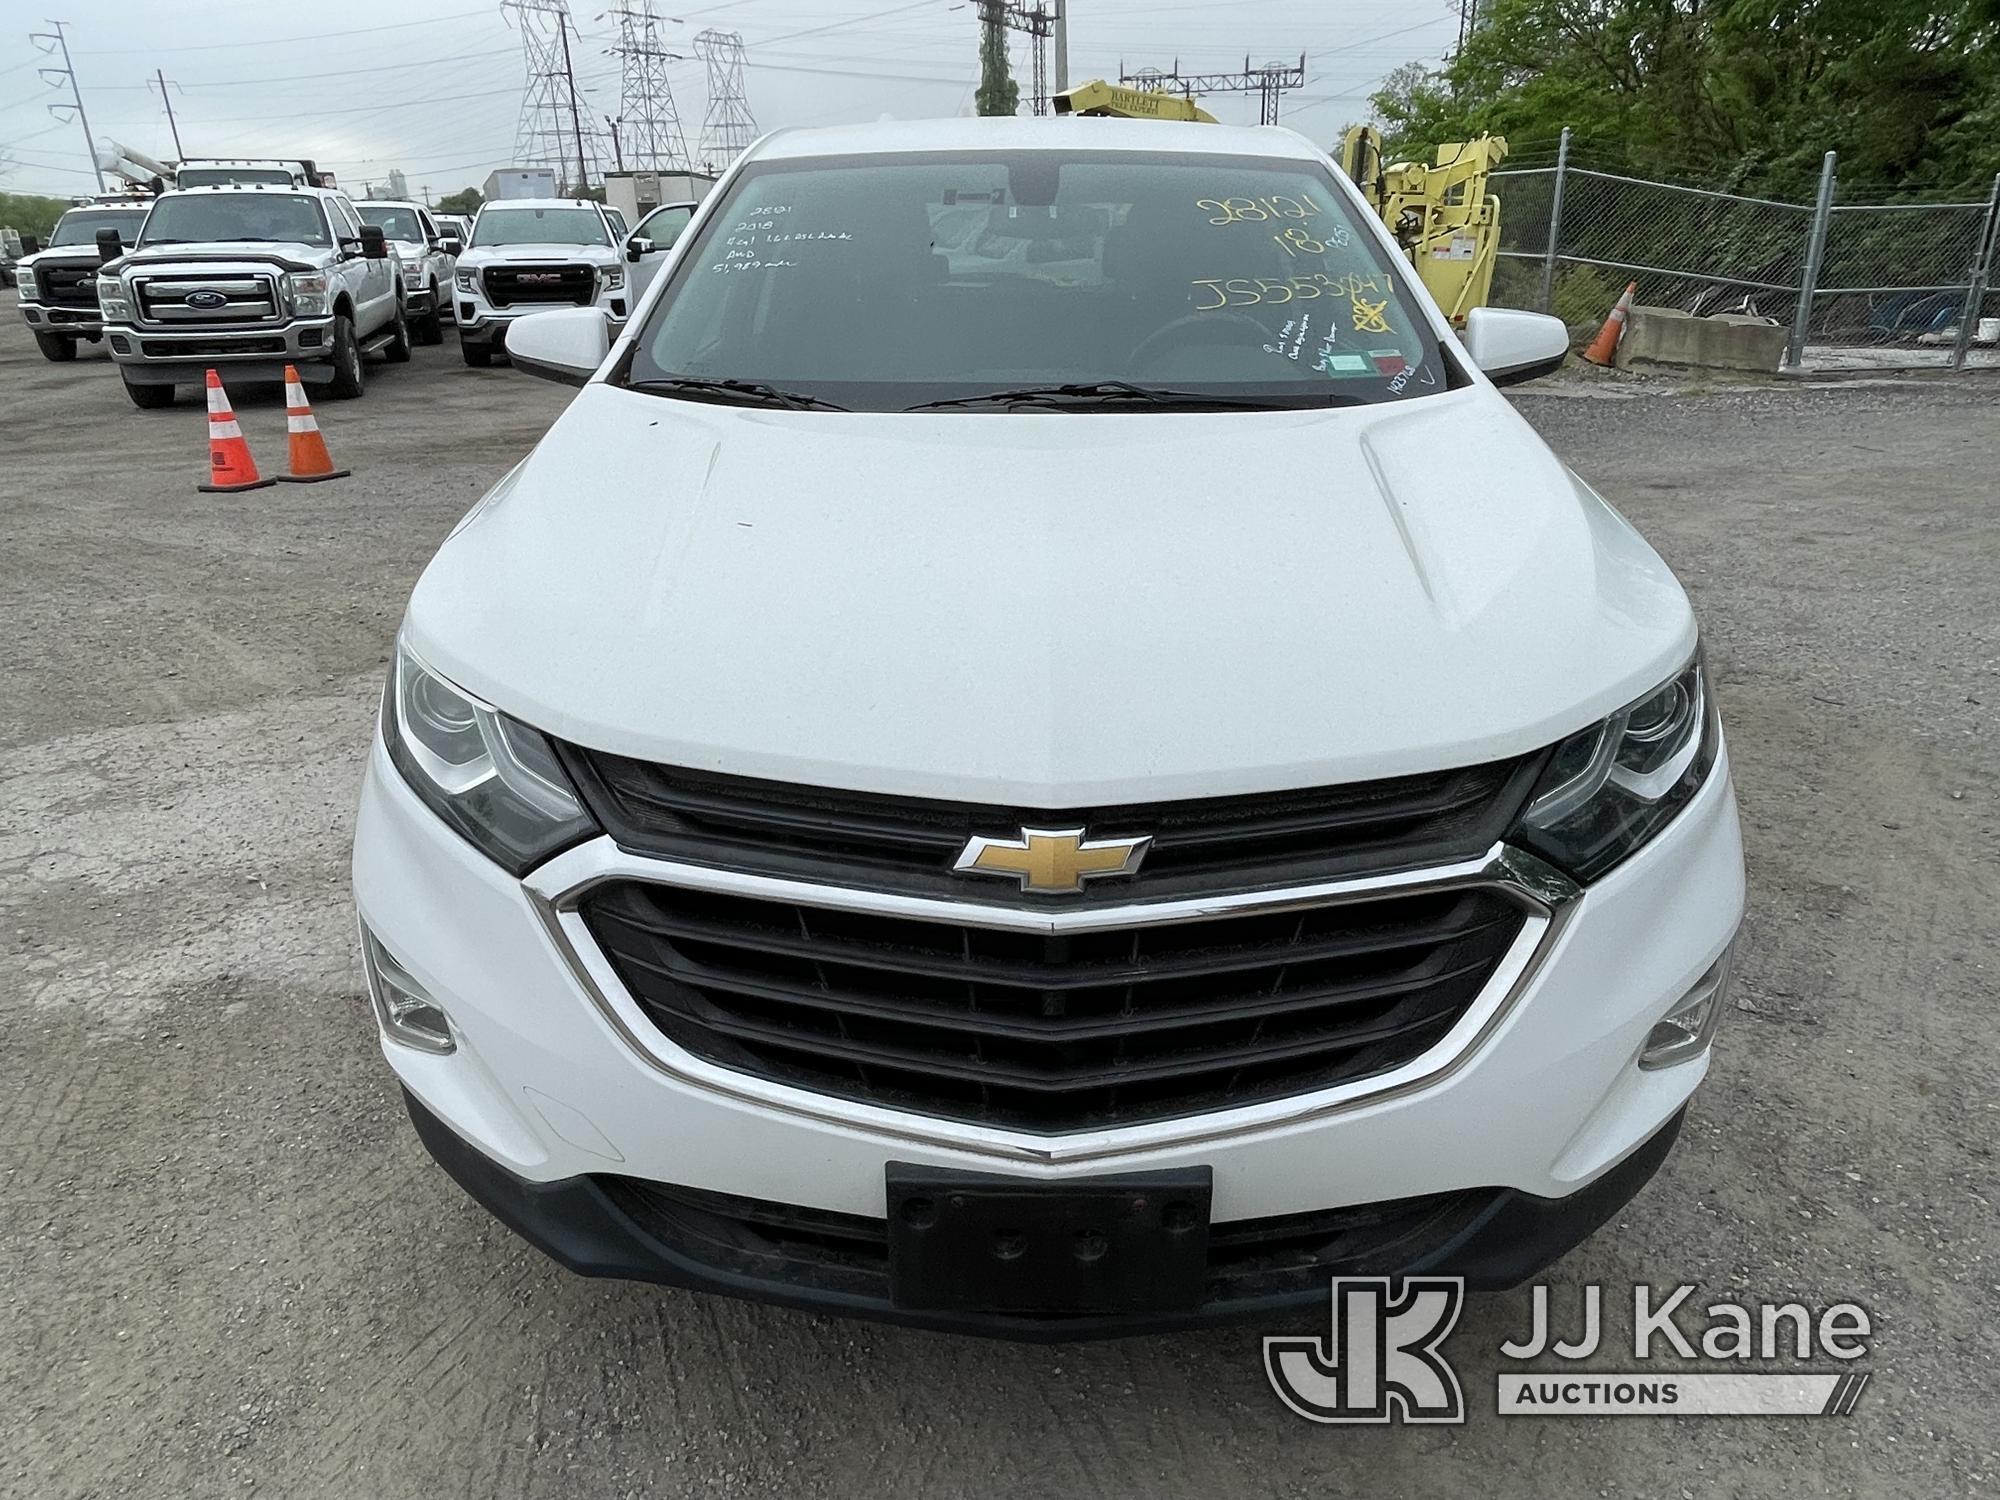 (Plymouth Meeting, PA) 2018 Chevrolet Equinox AWD 4-Door Sport Utility Vehicle Runs & Moves, Body &